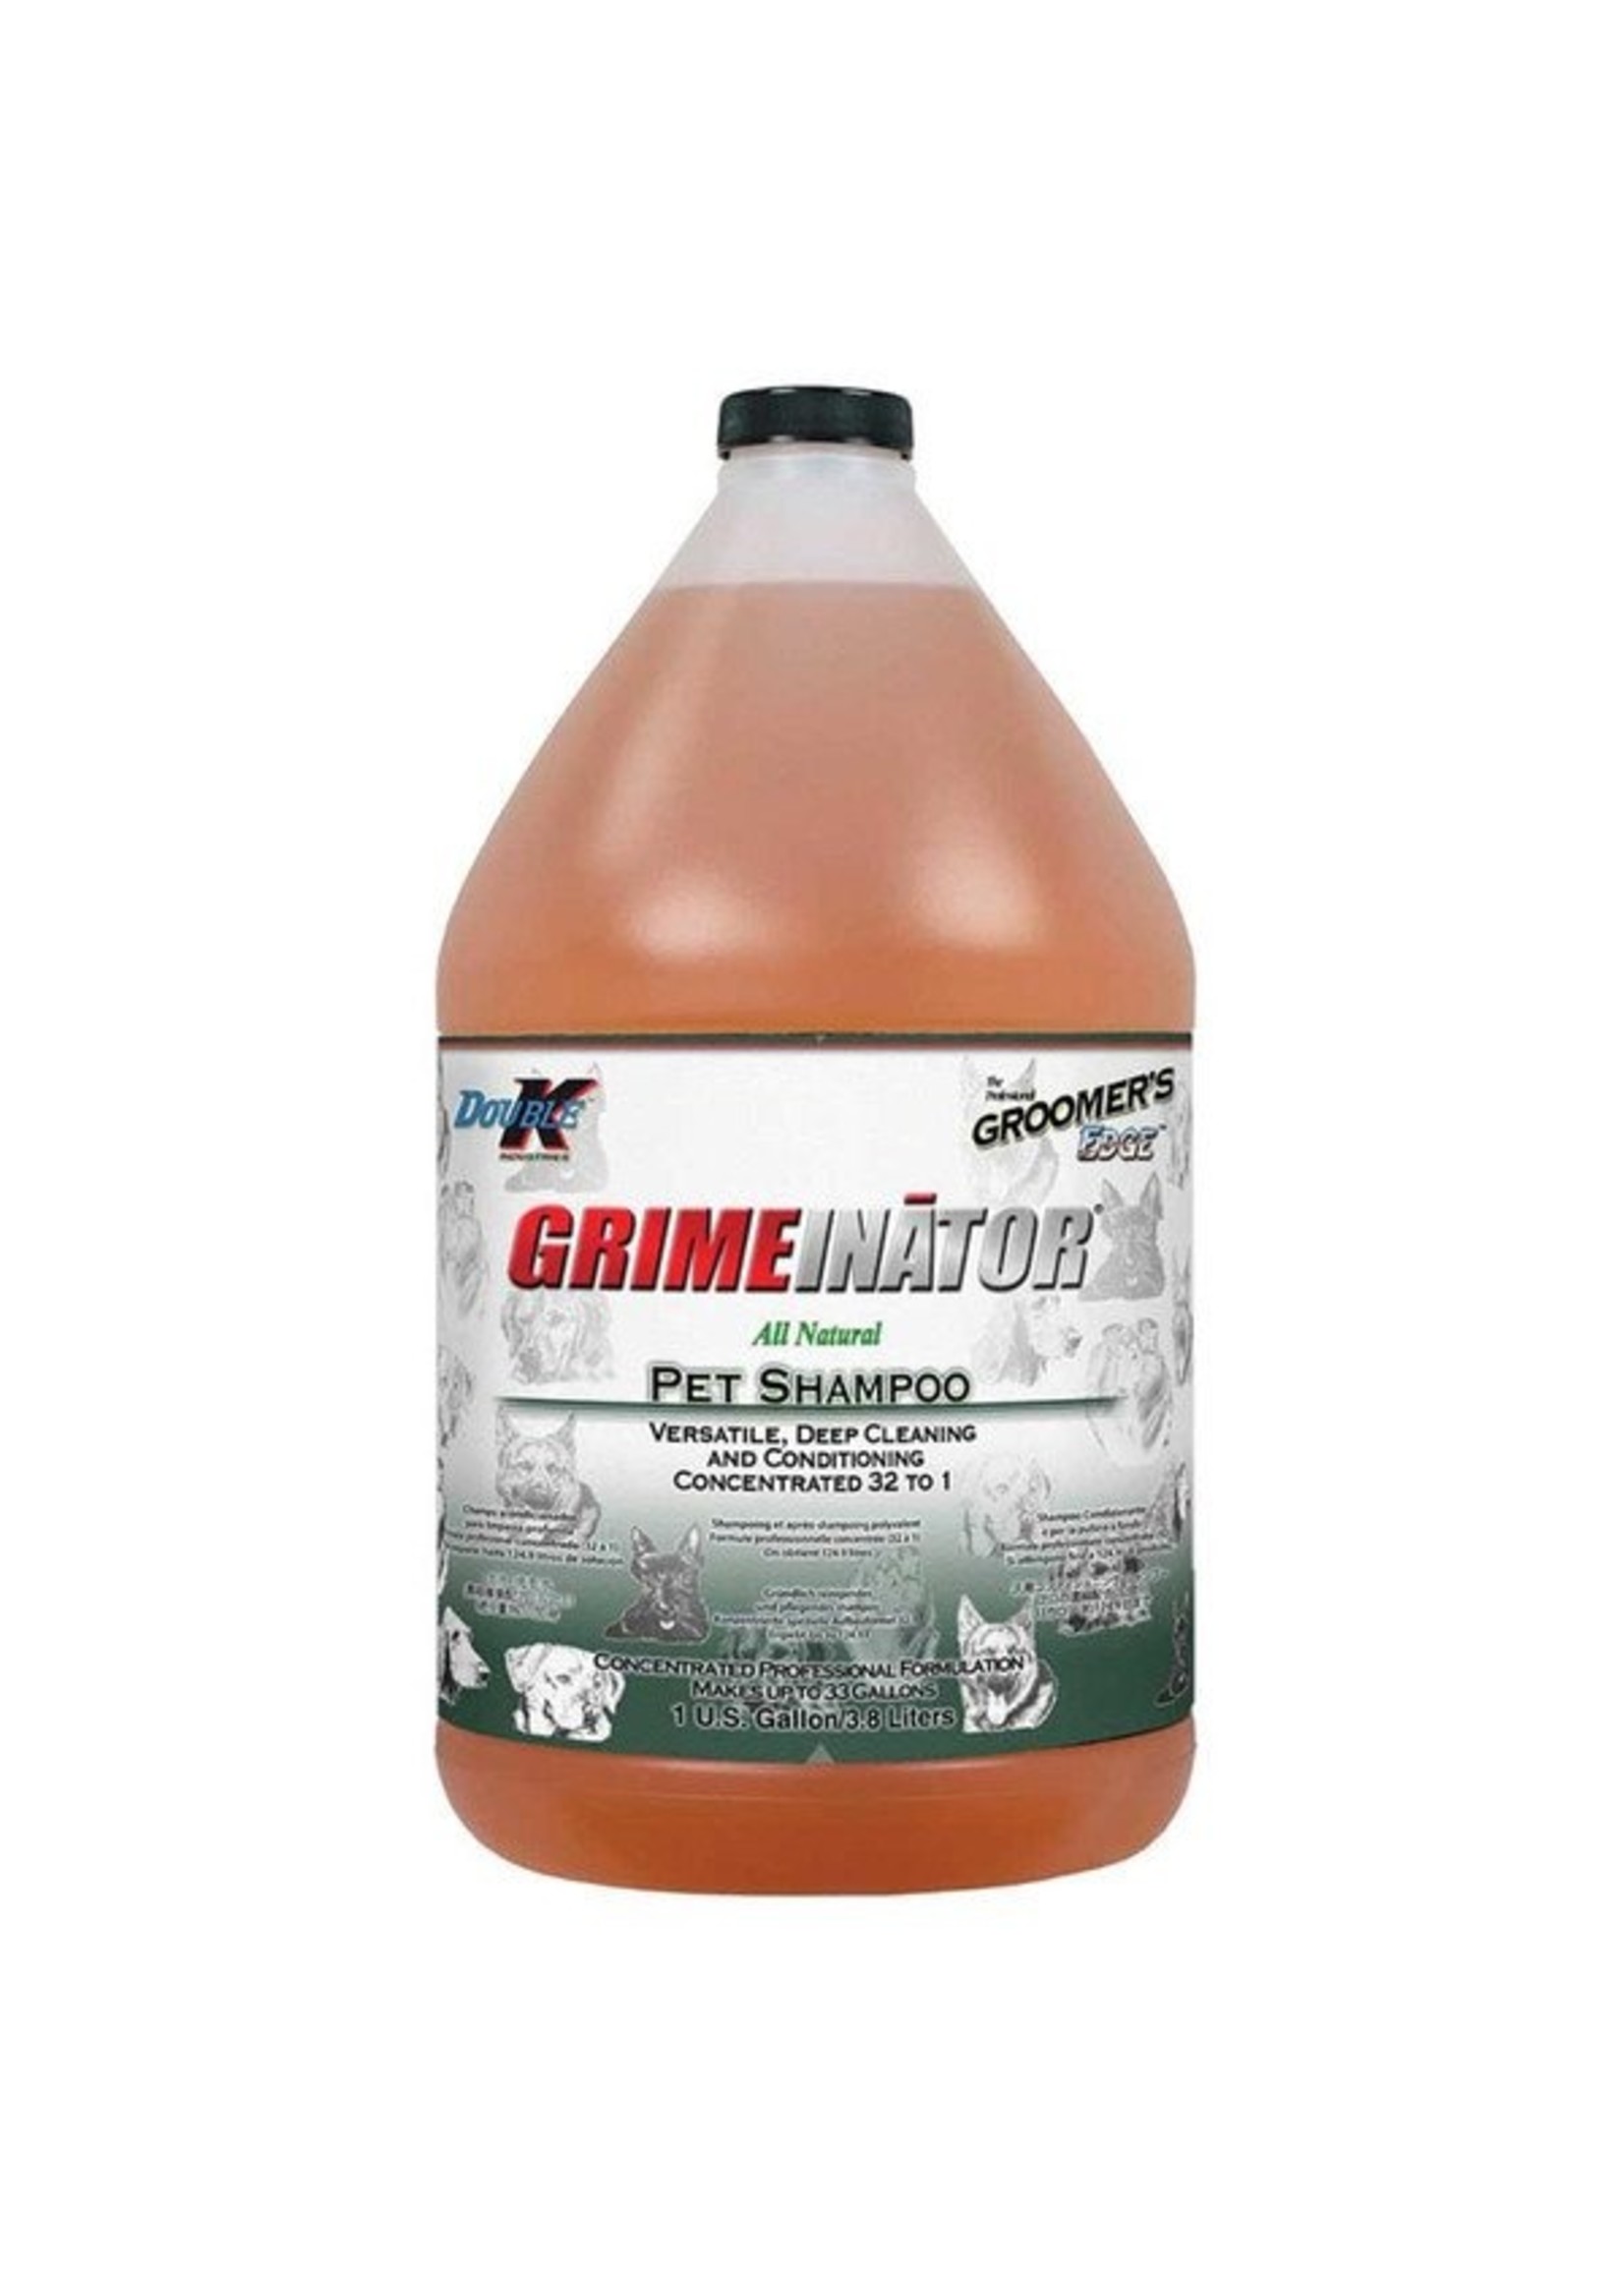 DoubleK Grimeinator Versatile Deep Cleaning Conditioning Concentrated 32 To 1 Shampoo 1 Gallon